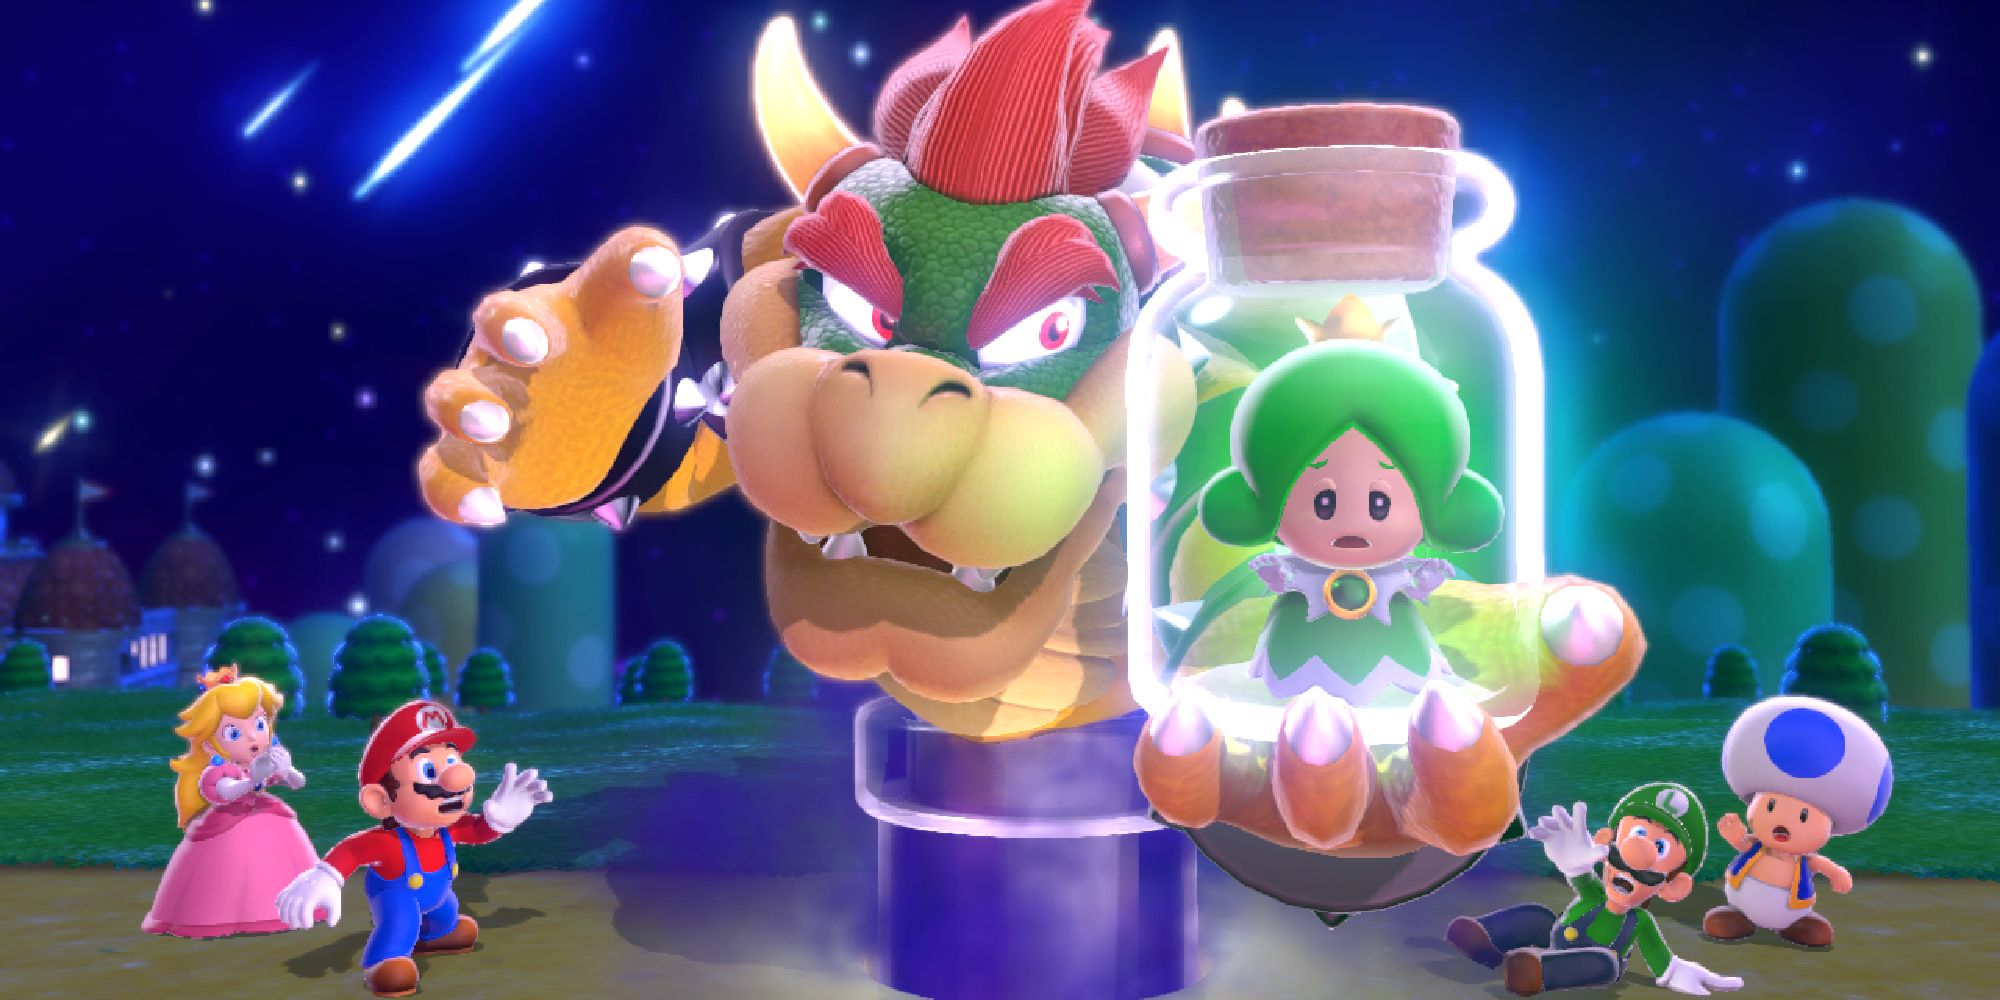 Peach, Mario, Luigi, and Toad watching as Bowser captures a green Sprixie Princess in a jar in Super Mario 3D World